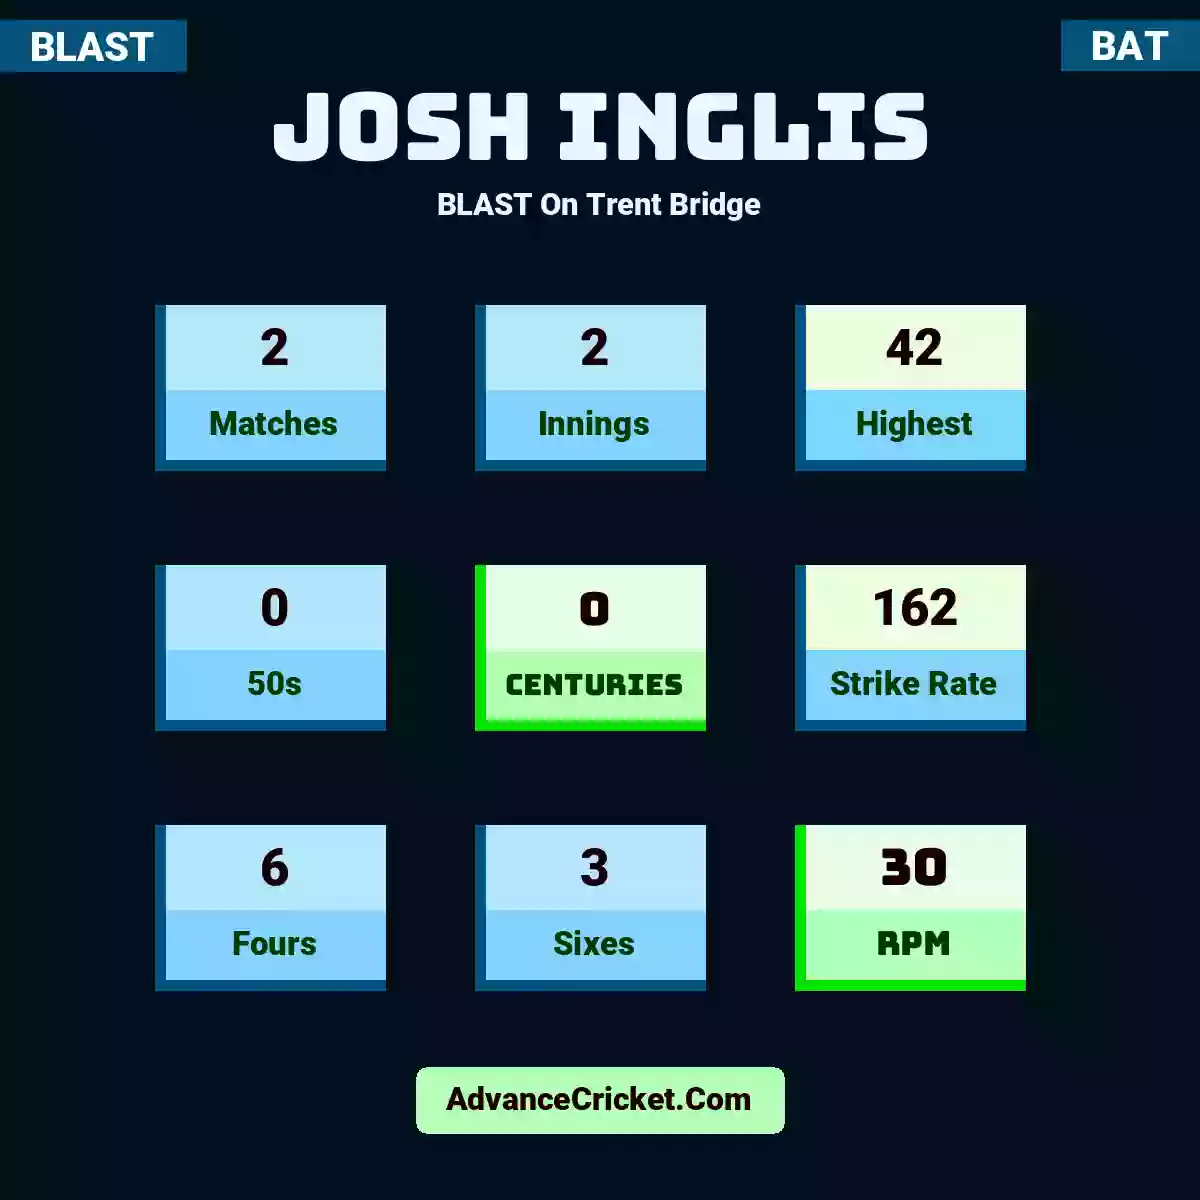 Josh Inglis BLAST  On Trent Bridge, Josh Inglis played 2 matches, scored 42 runs as highest, 0 half-centuries, and 0 centuries, with a strike rate of 162. J.Inglis hit 6 fours and 3 sixes, with an RPM of 30.